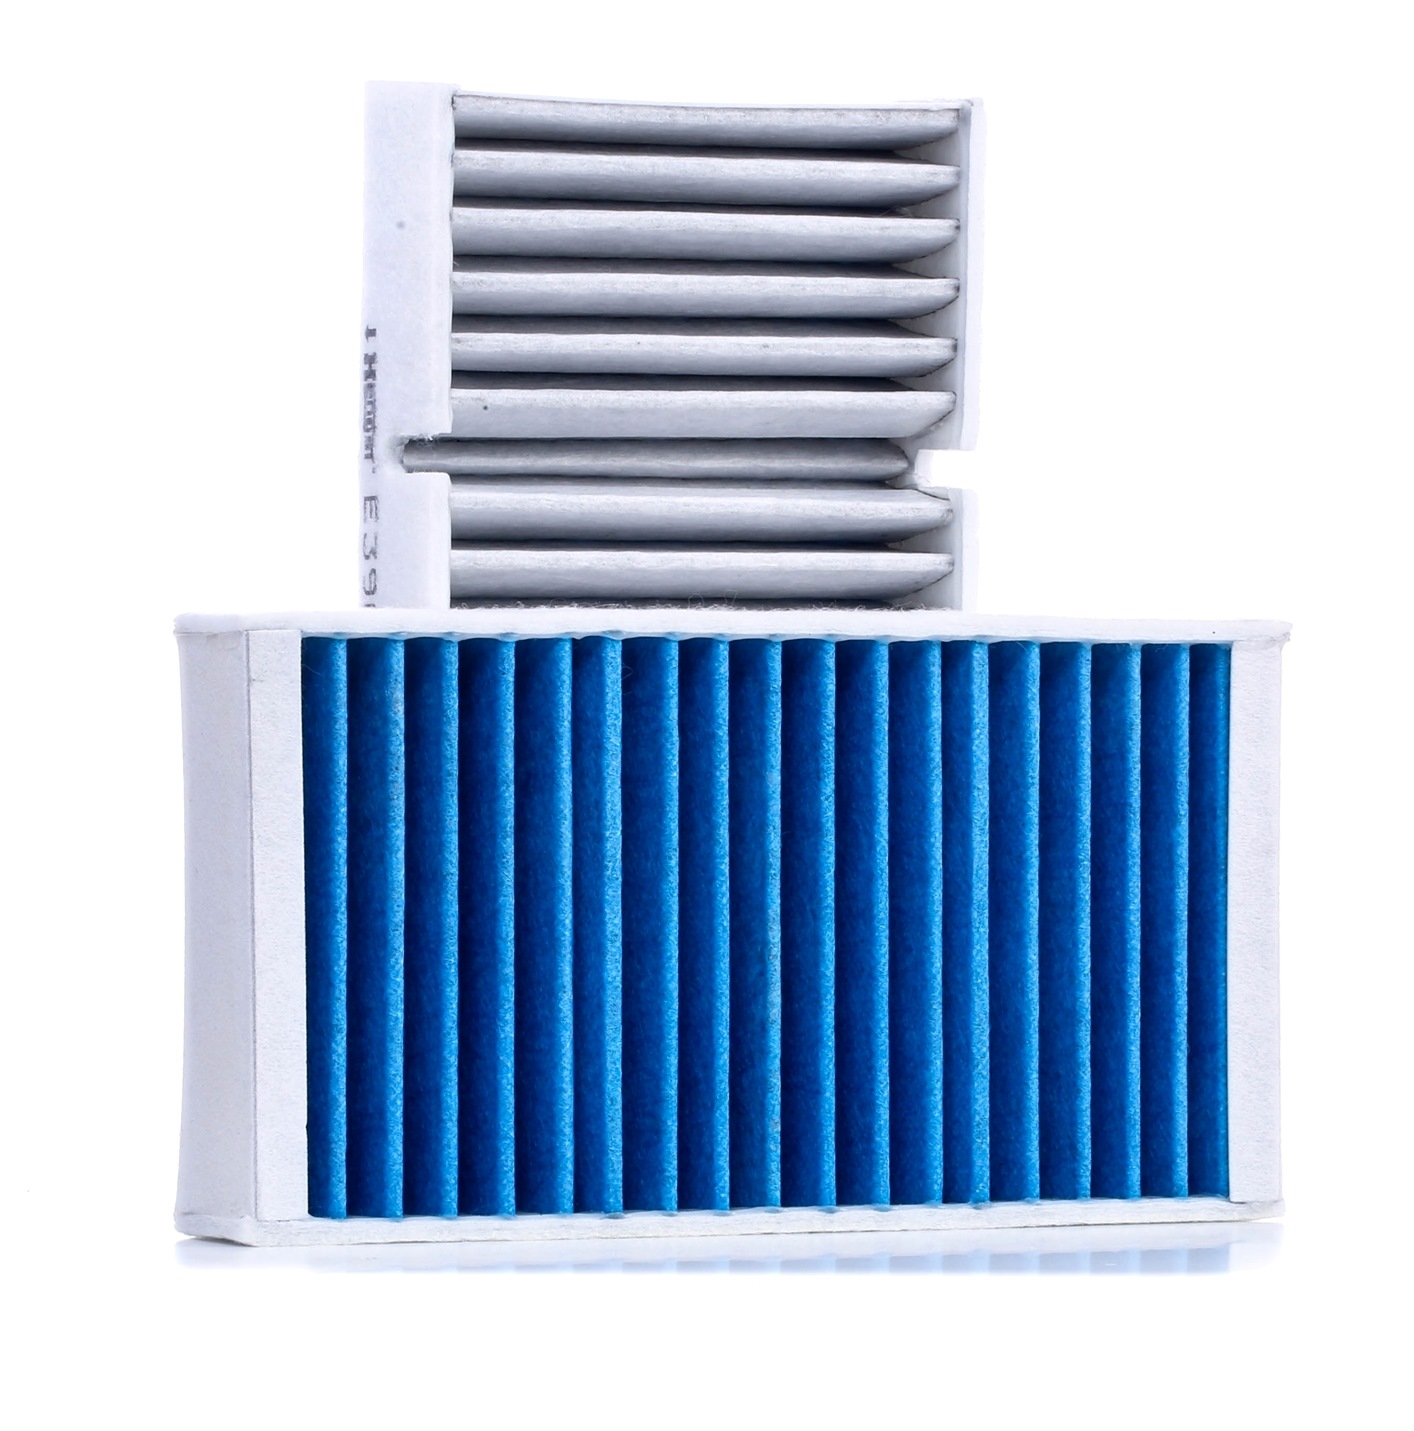 7064310000 HENGST FILTER with antibacterial action, 253 mm x 134 mm x 41 mm Width: 134mm, Height: 41mm, Length: 253mm Cabin filter E3909LB-2 buy